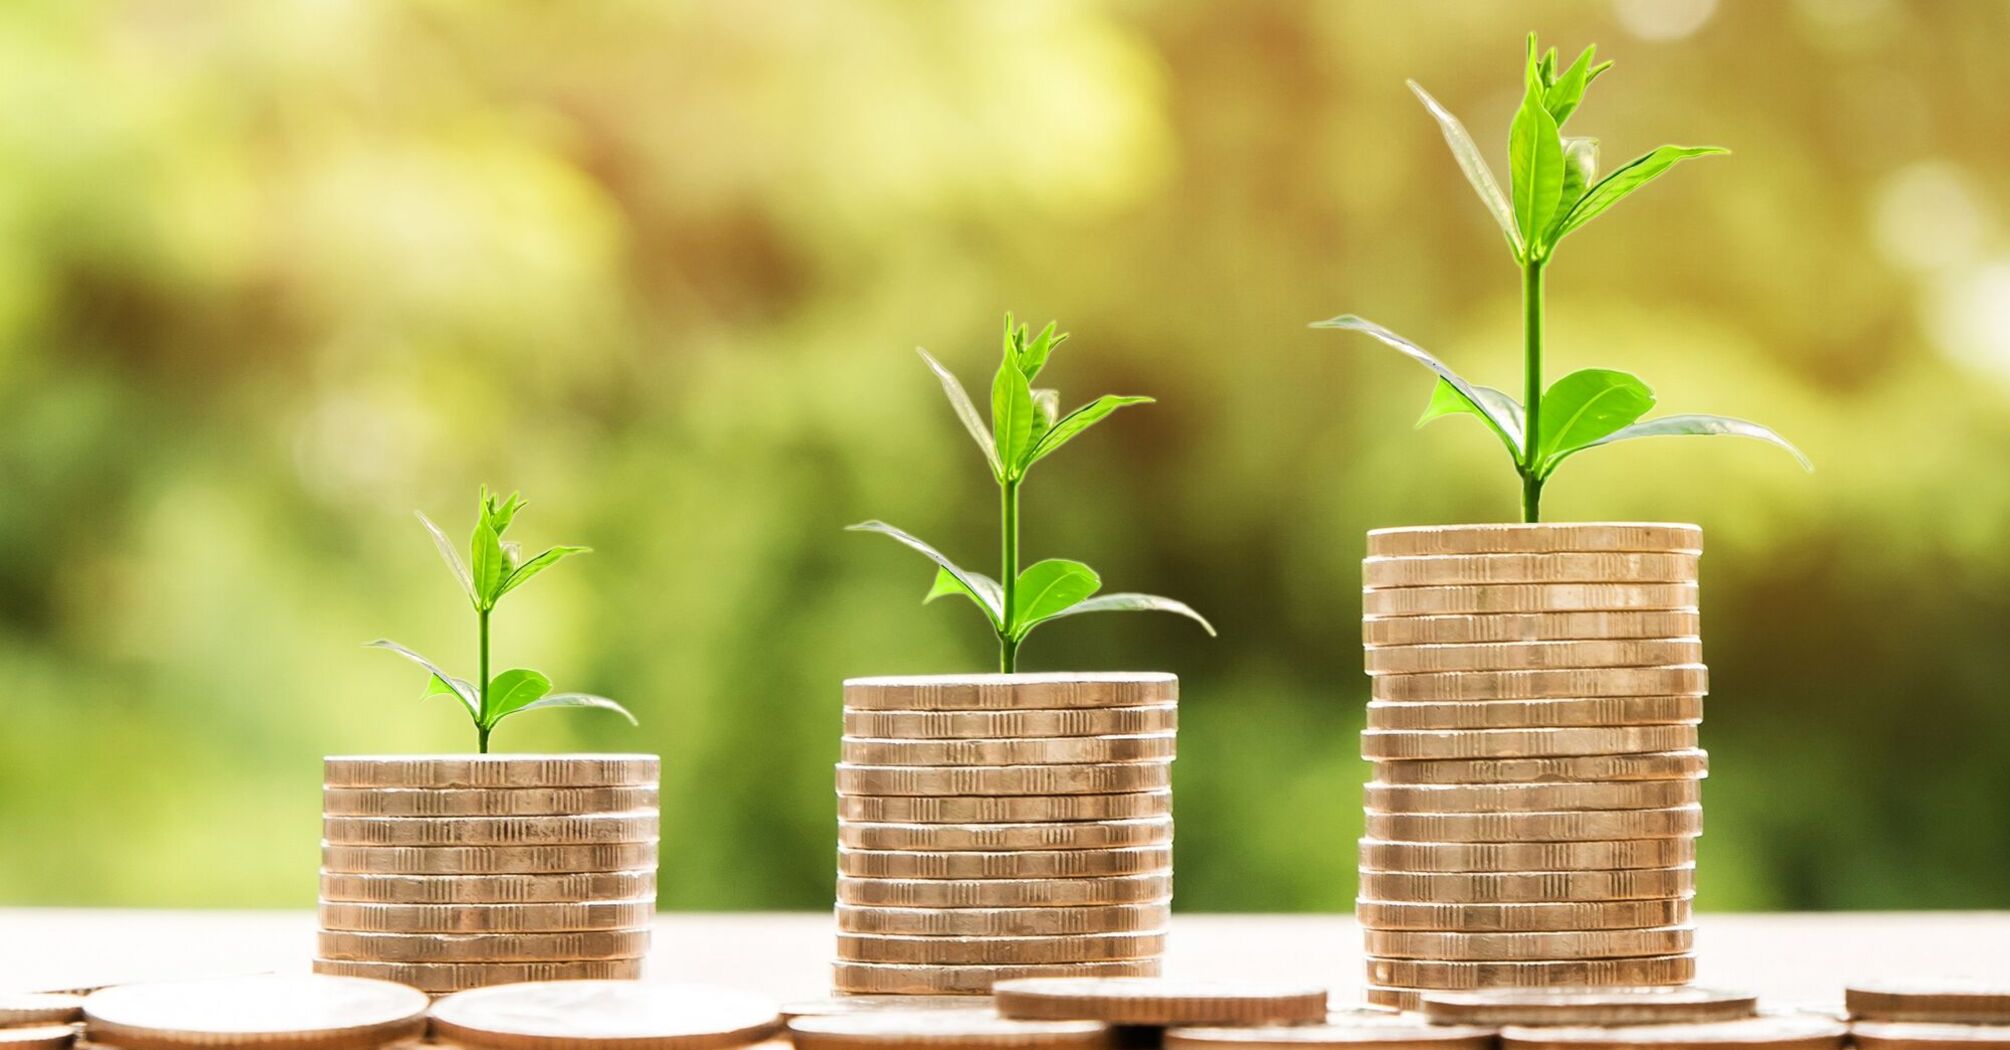 Stacks of coins with young plants sprouting on top against a blurred green background